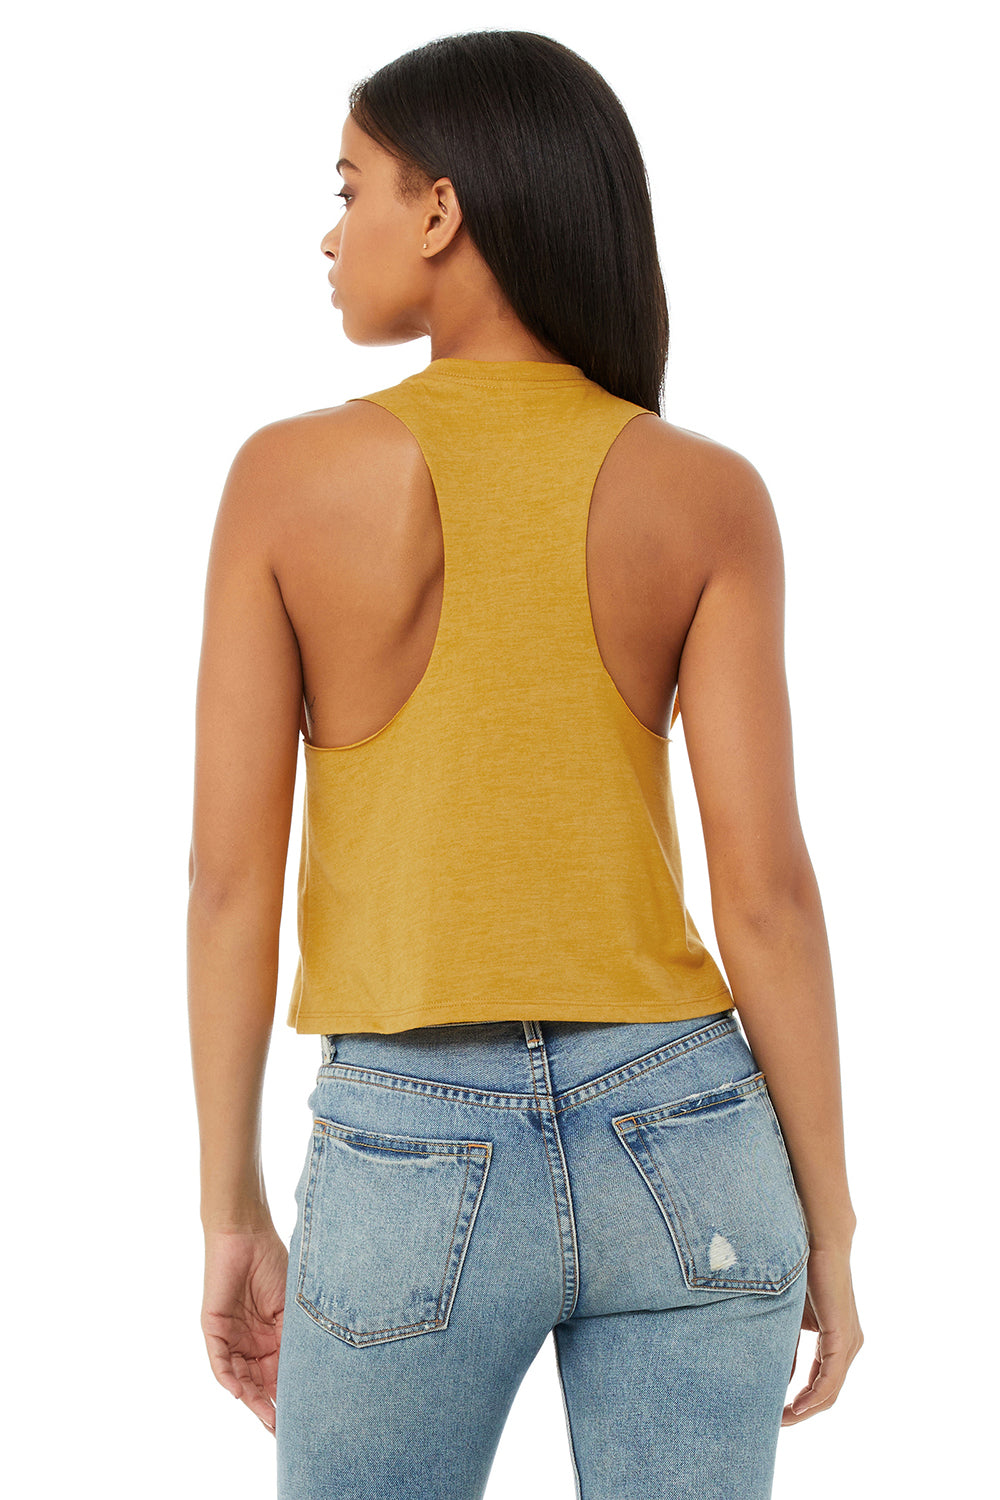 Bella + Canvas BC6682/6682 Womens Cropped Tank Top Heather Mustard Yellow Model Back